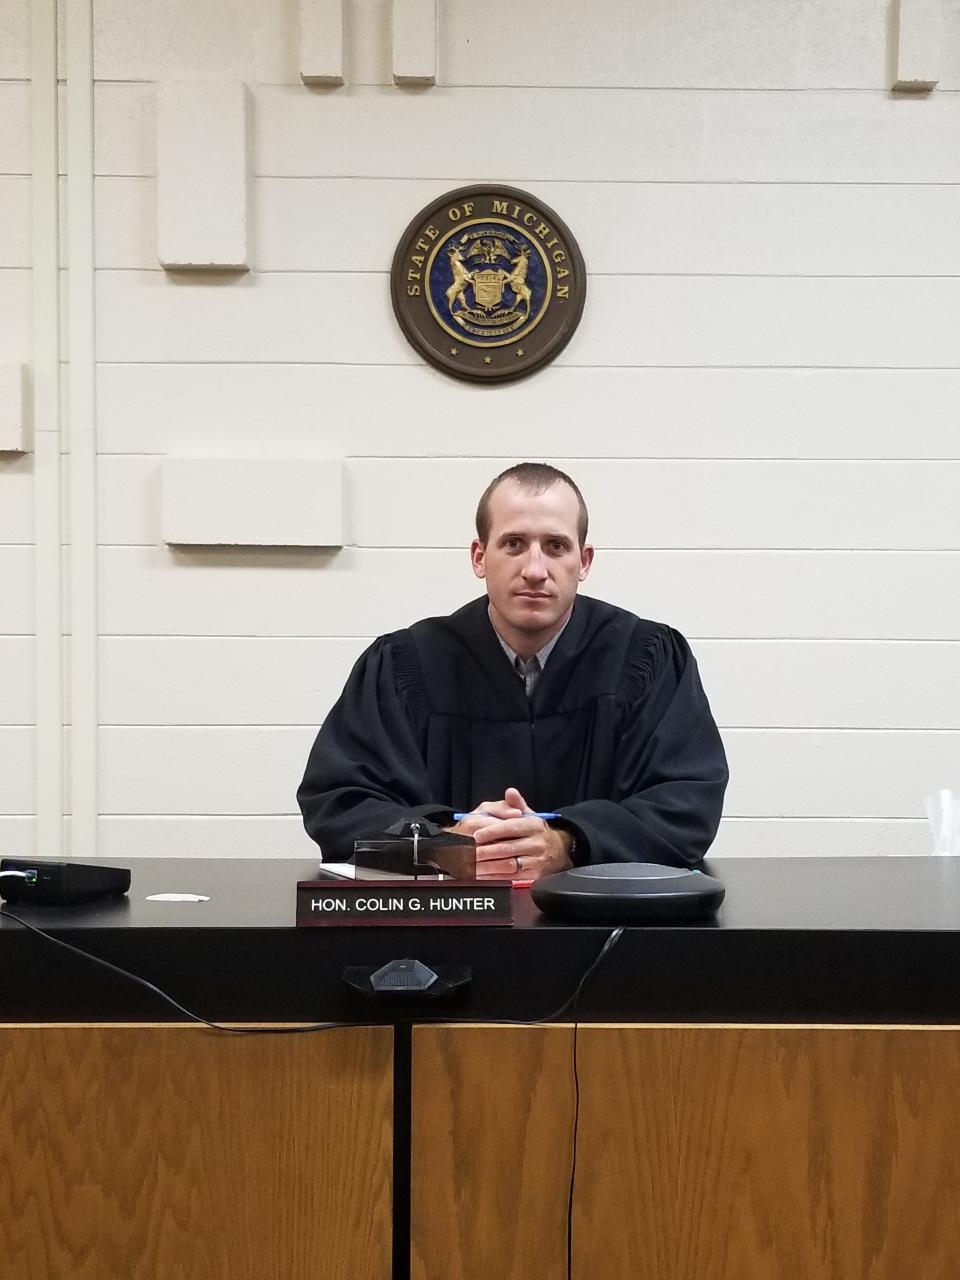 Otsego County Circuit Court Judge Colin Hunter heard from attorneys representing the Health Department of Northwest Michigan and Ian Murphy, owner of the Iron Pig restaurant in Gaylord, in Murphy's lawsuit against the department over its enforcement of Covid-19 restrictions.